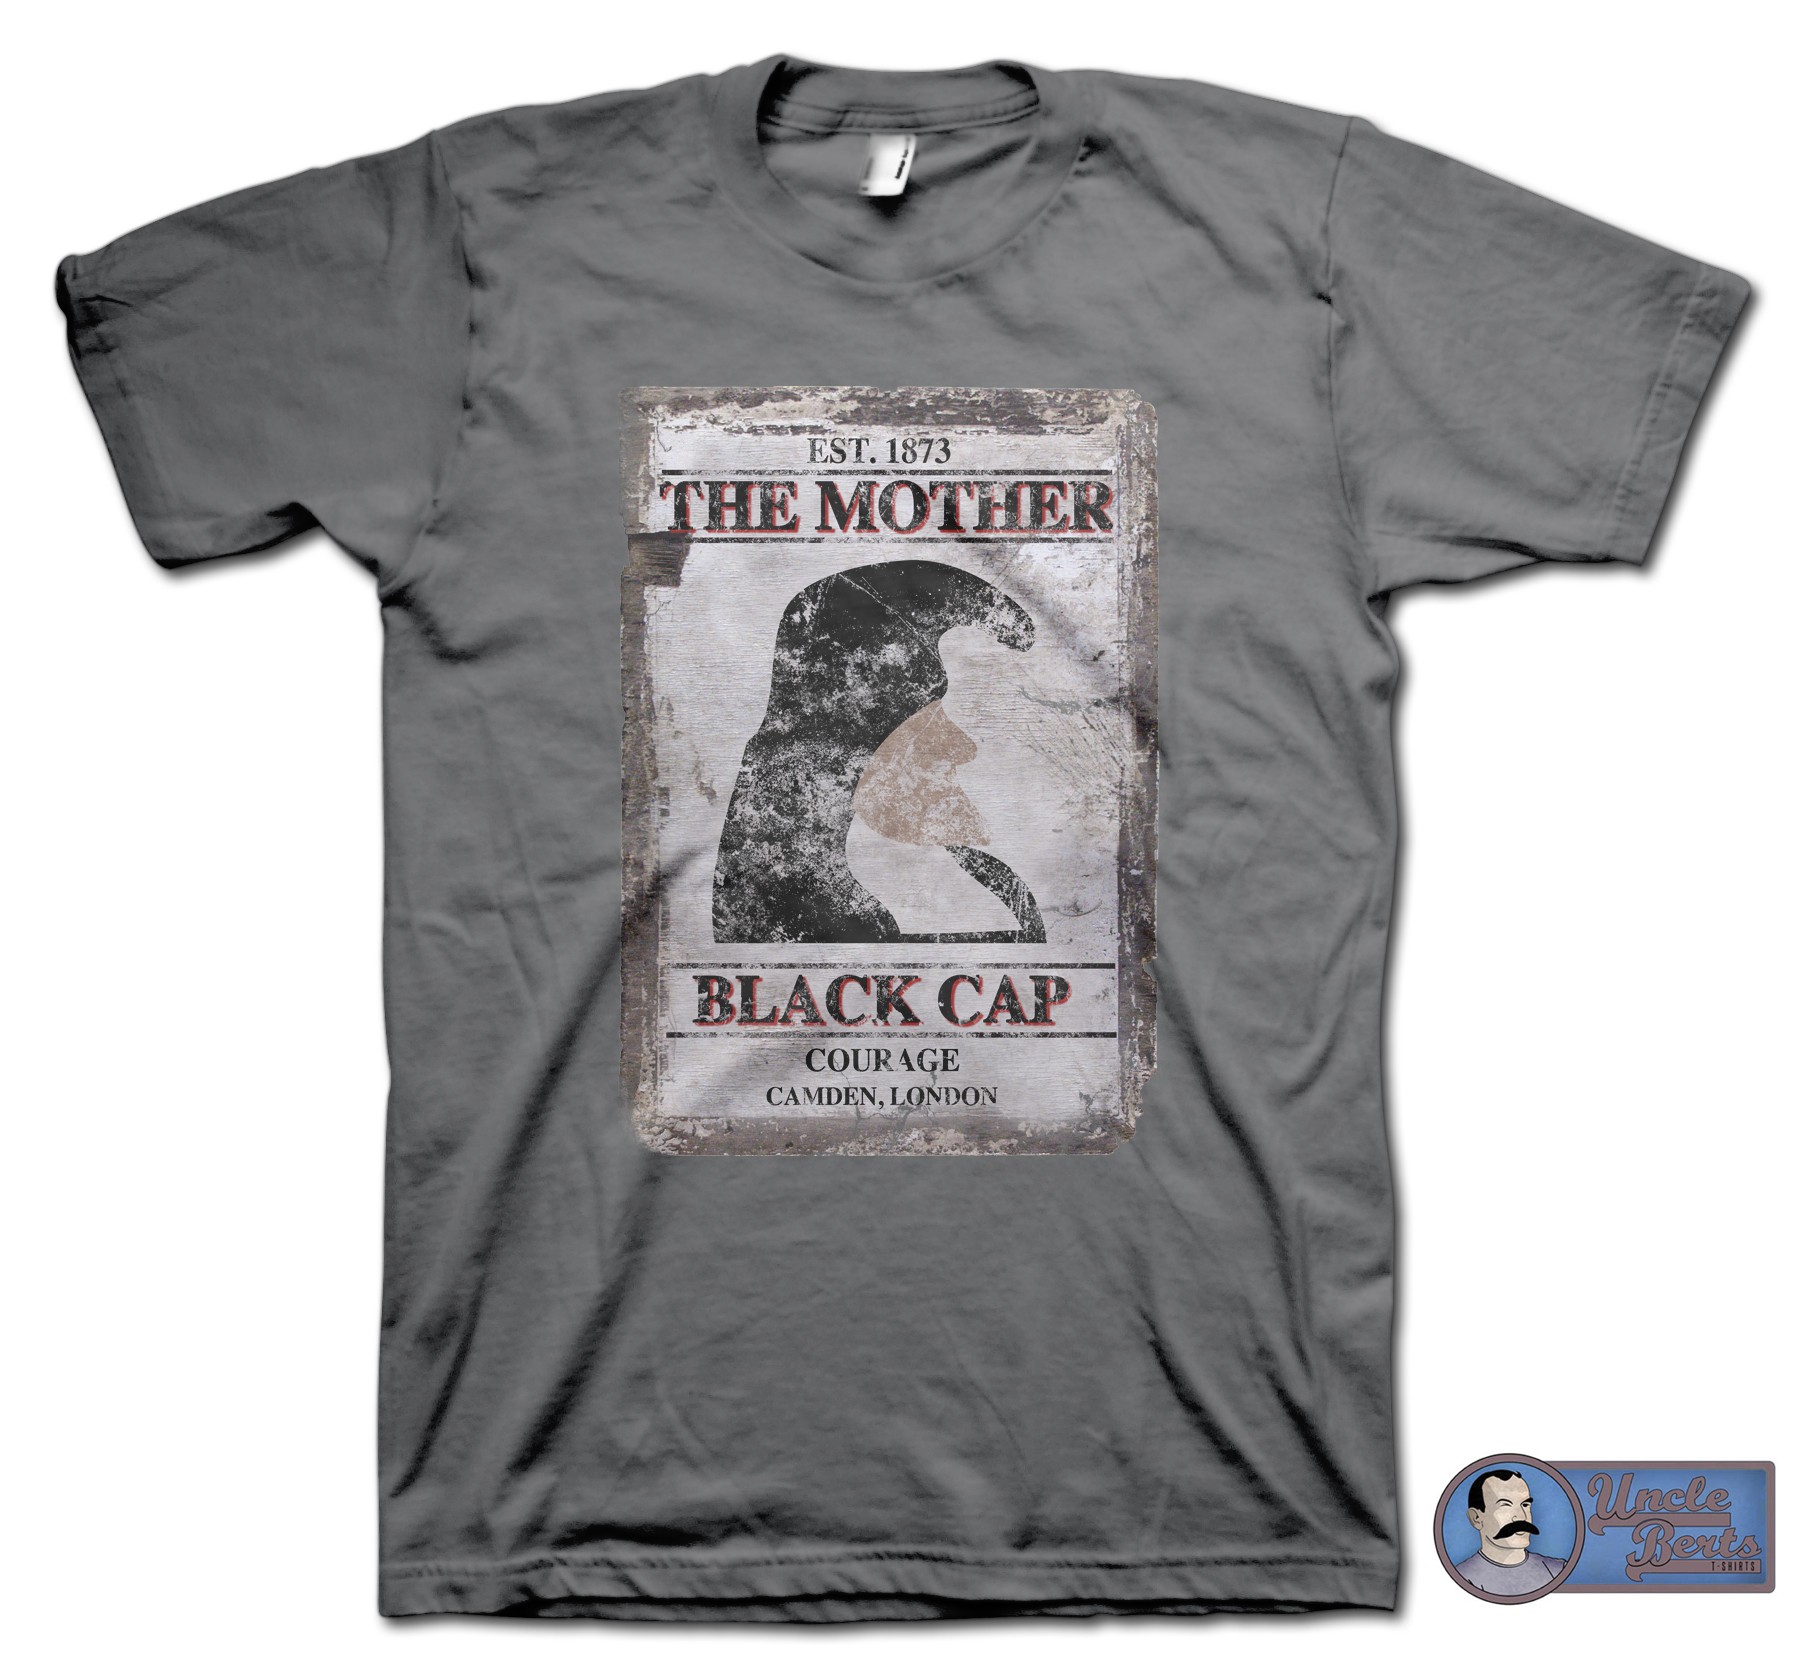 Withnail and I (1987) inspired The Mother Black Cap T-Shirt